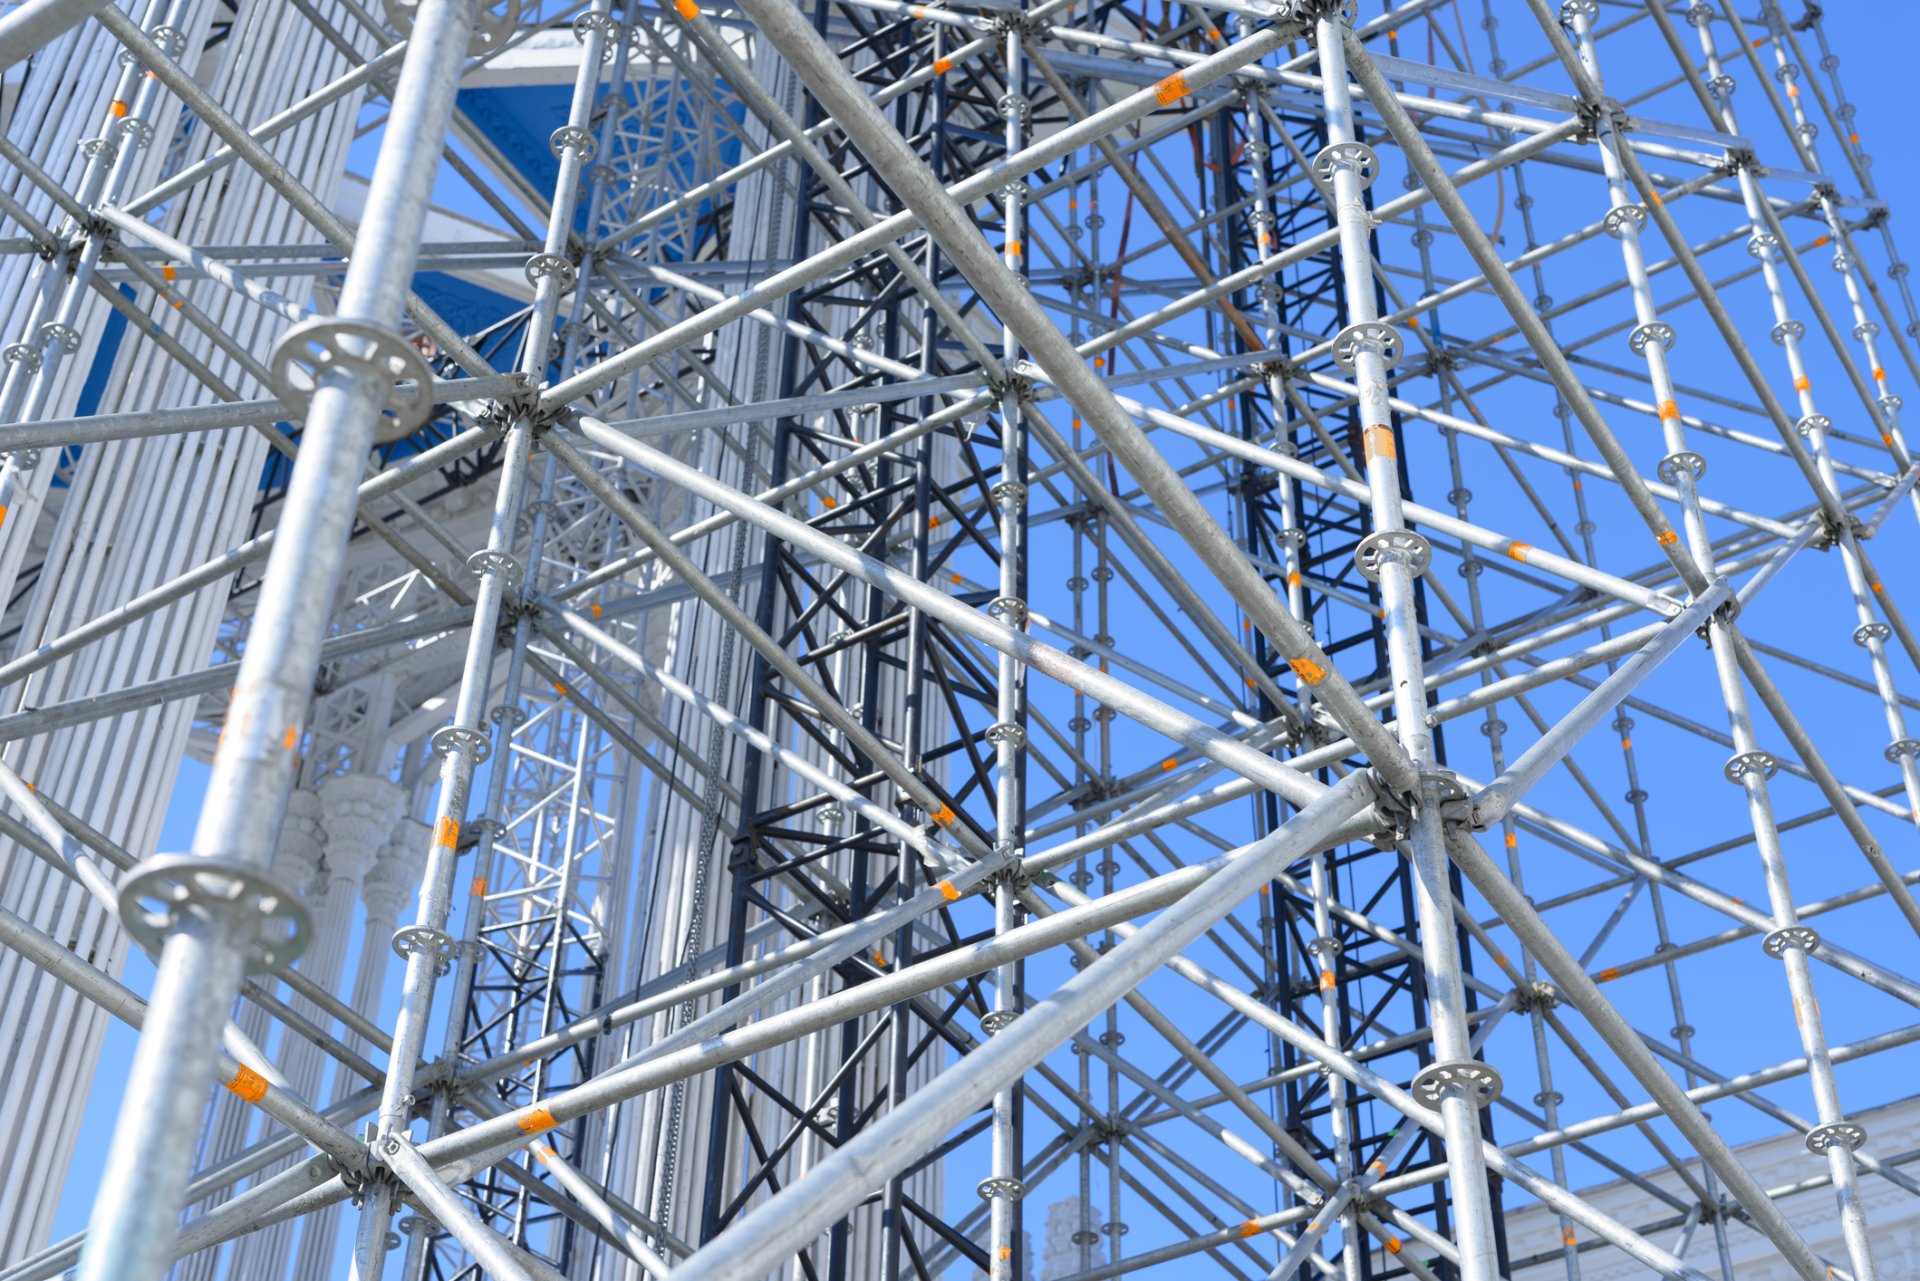 The specific things that need to be paid attention to when erecting mobile scaffolding are